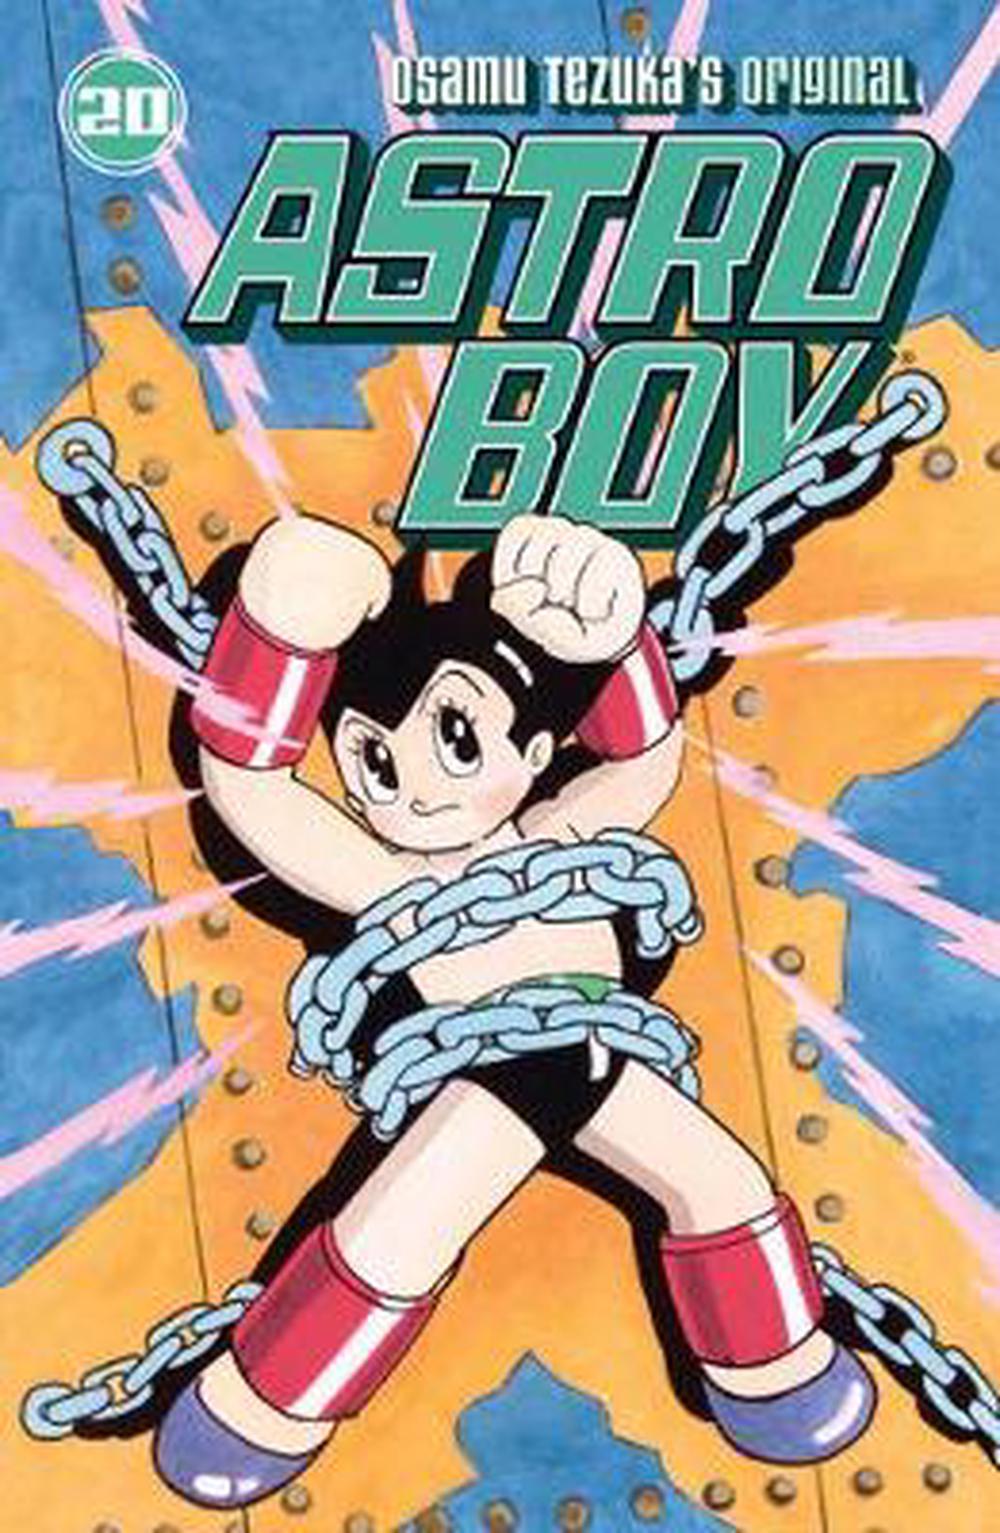 Astro Boy by Osamu Tezuka, Paperback, 9781569719015 | Buy online at The